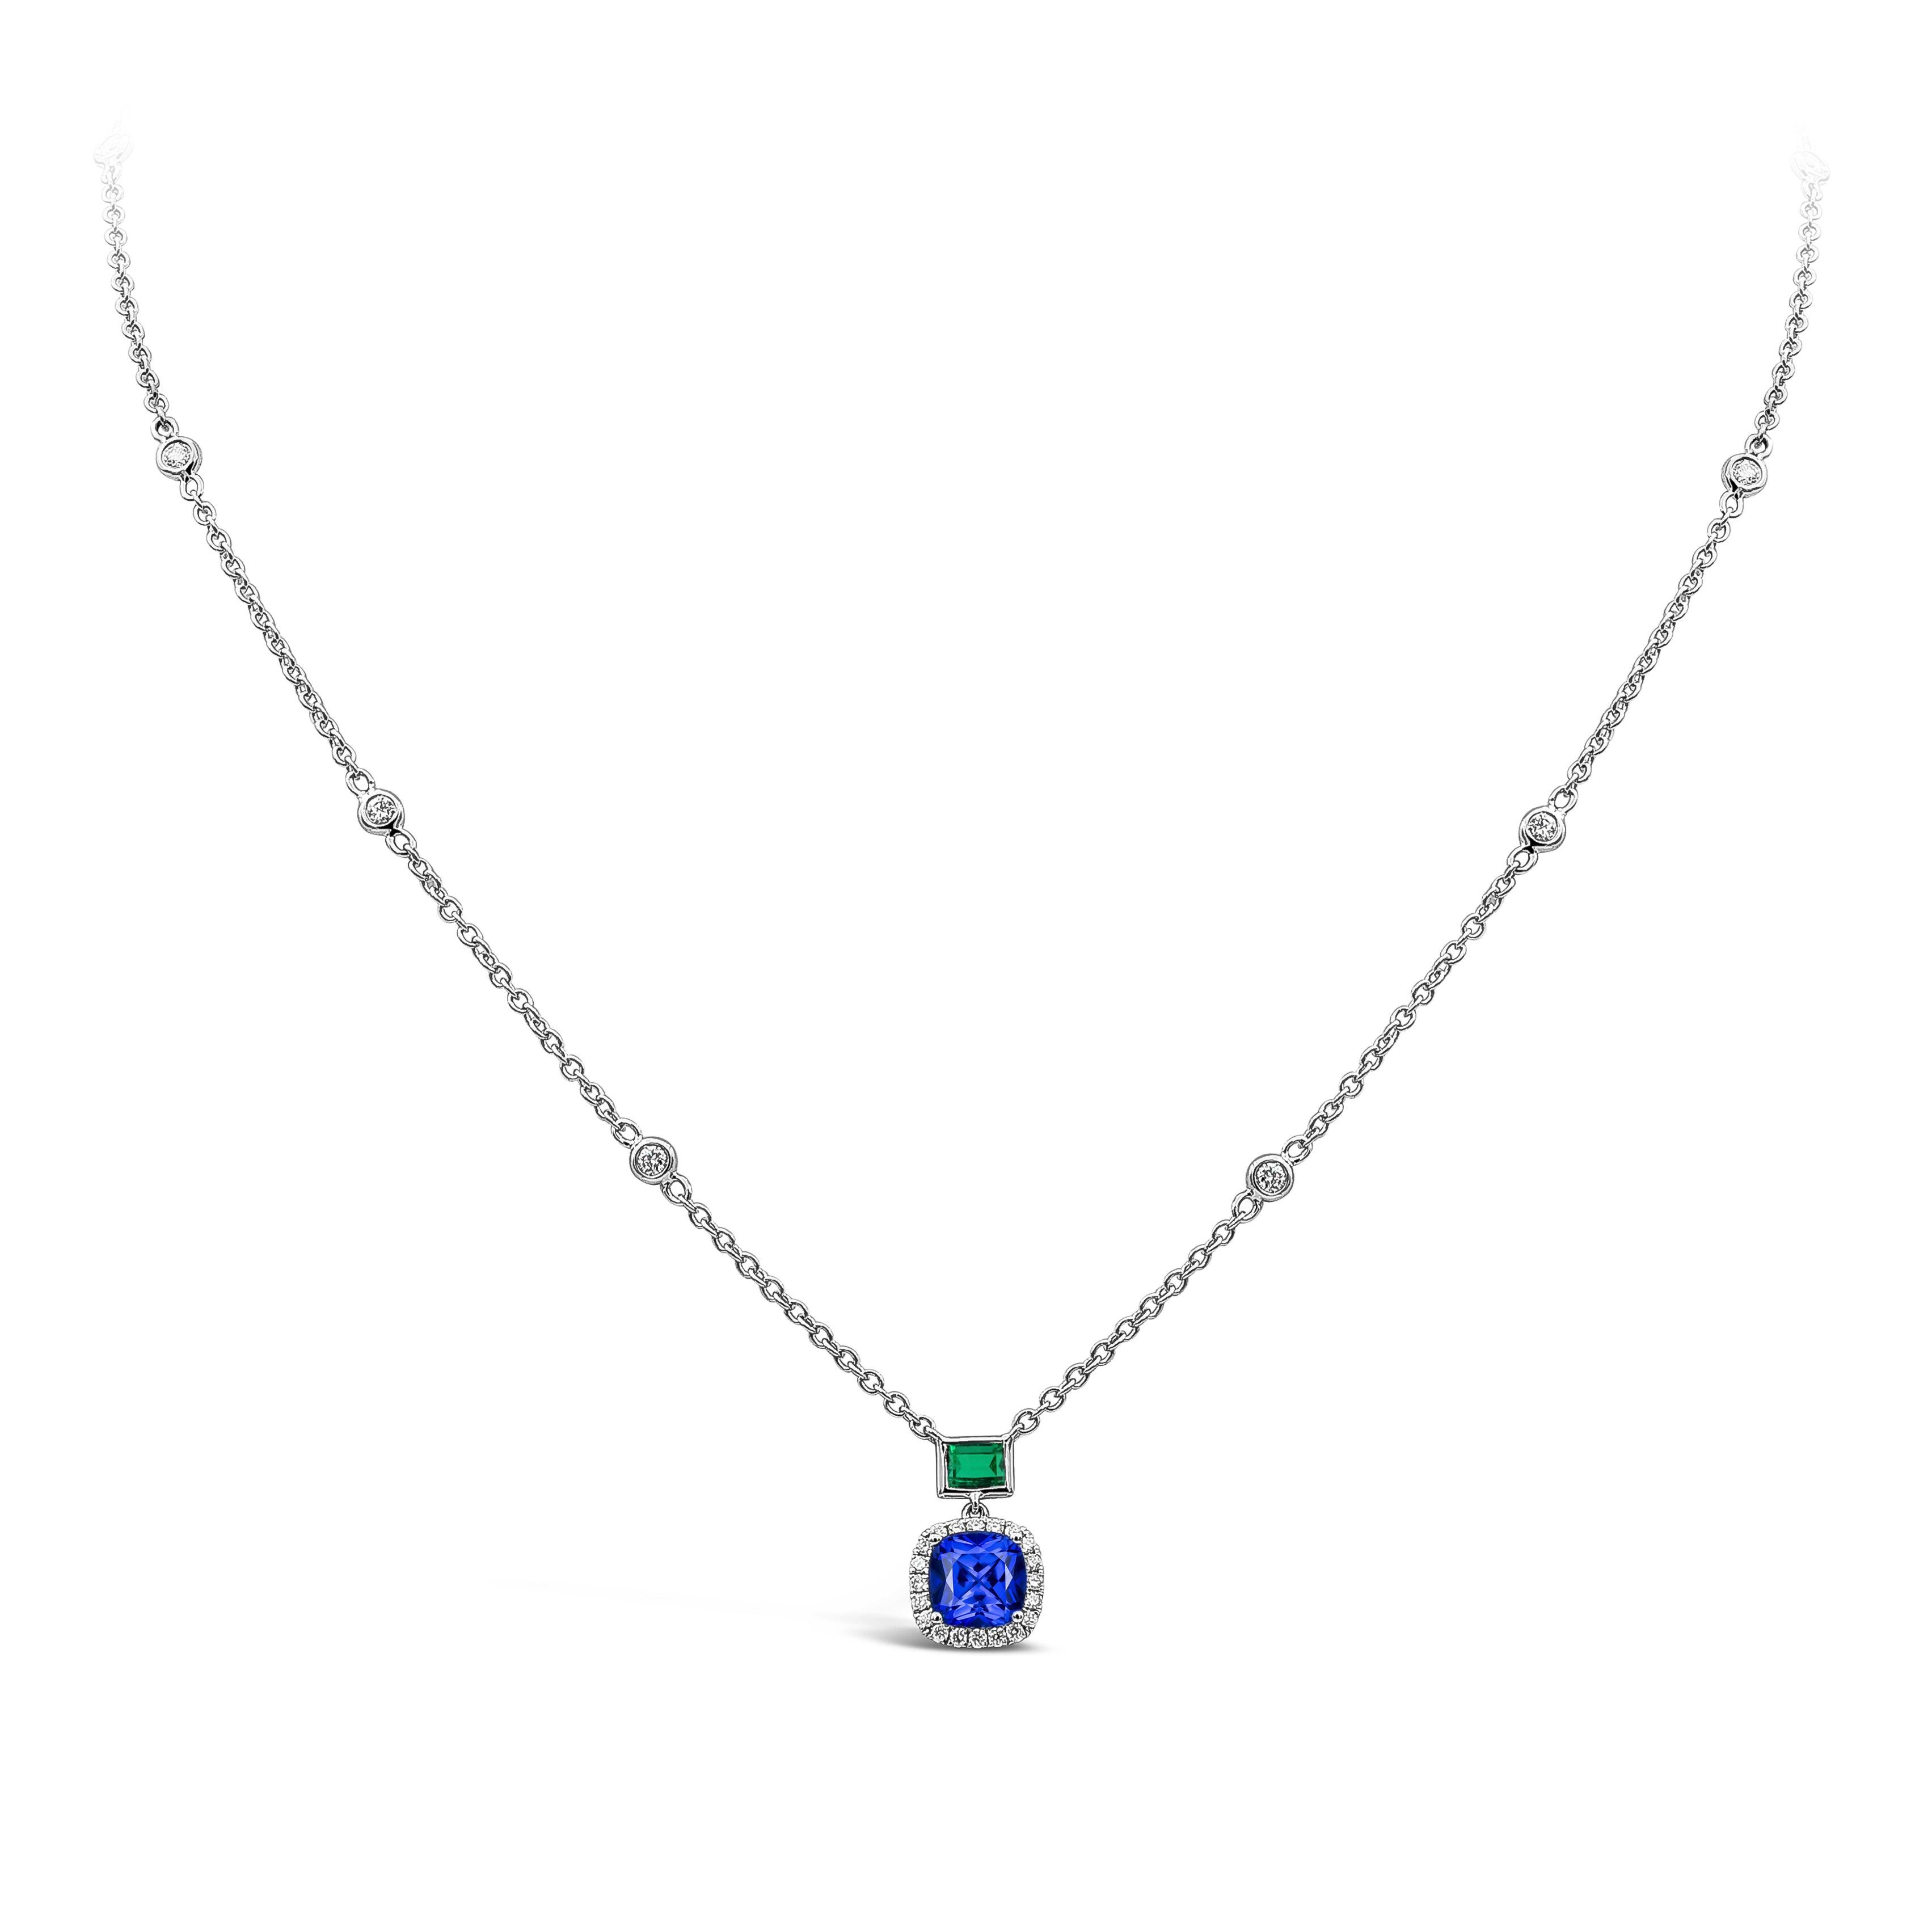 A color-rich and simple pendant necklace showcasing a blue cushion cut sapphire set in a brilliant diamond halo. The sapphire halo is suspended on an emerald cut green emerald, attached to a chic diamonds by the yard chain. Made in 18k white